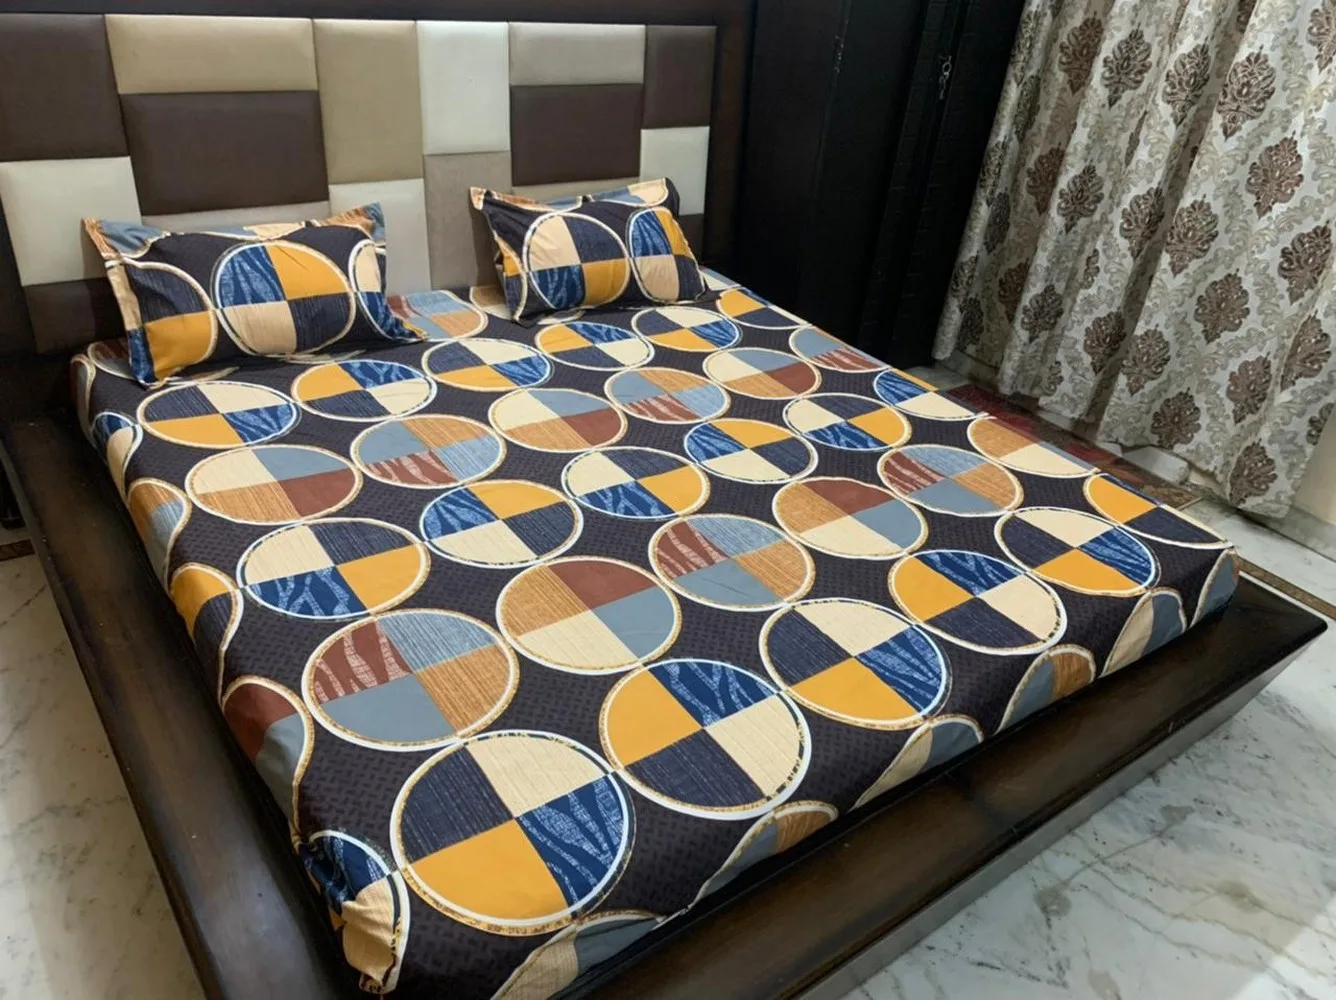 Bedsheet printed, Fitted, Elastic Corner, 90x100, Glace Cotton, 2 Pillow Covers, blue circle design